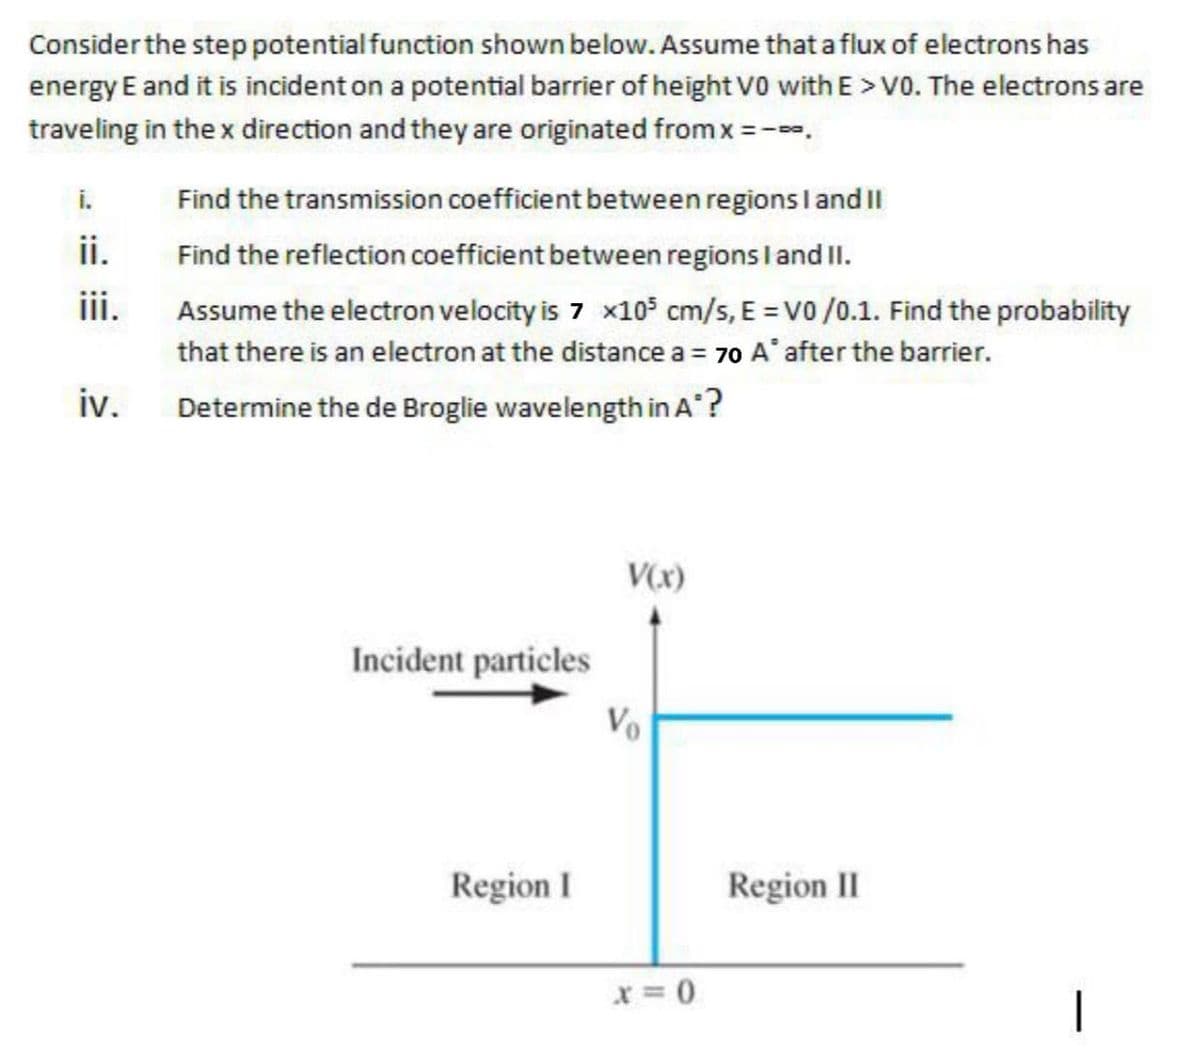 Consider the step potential function shown below. Assume that a flux of electrons has
energy E and it is incident on a potential barrier of height V0 with E > V0. The electrons are
traveling in the x direction and they are originated from x = --,
i.
Find the transmission coefficient between regions l and II
ii.
Find the reflection coefficient between regions l and II.
ii.
Assume the electron velocity is 7 x105 cm/s, E = V0 /0.1. Find the probability
that there is an electron at the distance a = 70 A* after the barrier.
iv.
Determine the de Broglie wavelength in A?
V(x)
Incident particles
Region I
Region II
x = 0
